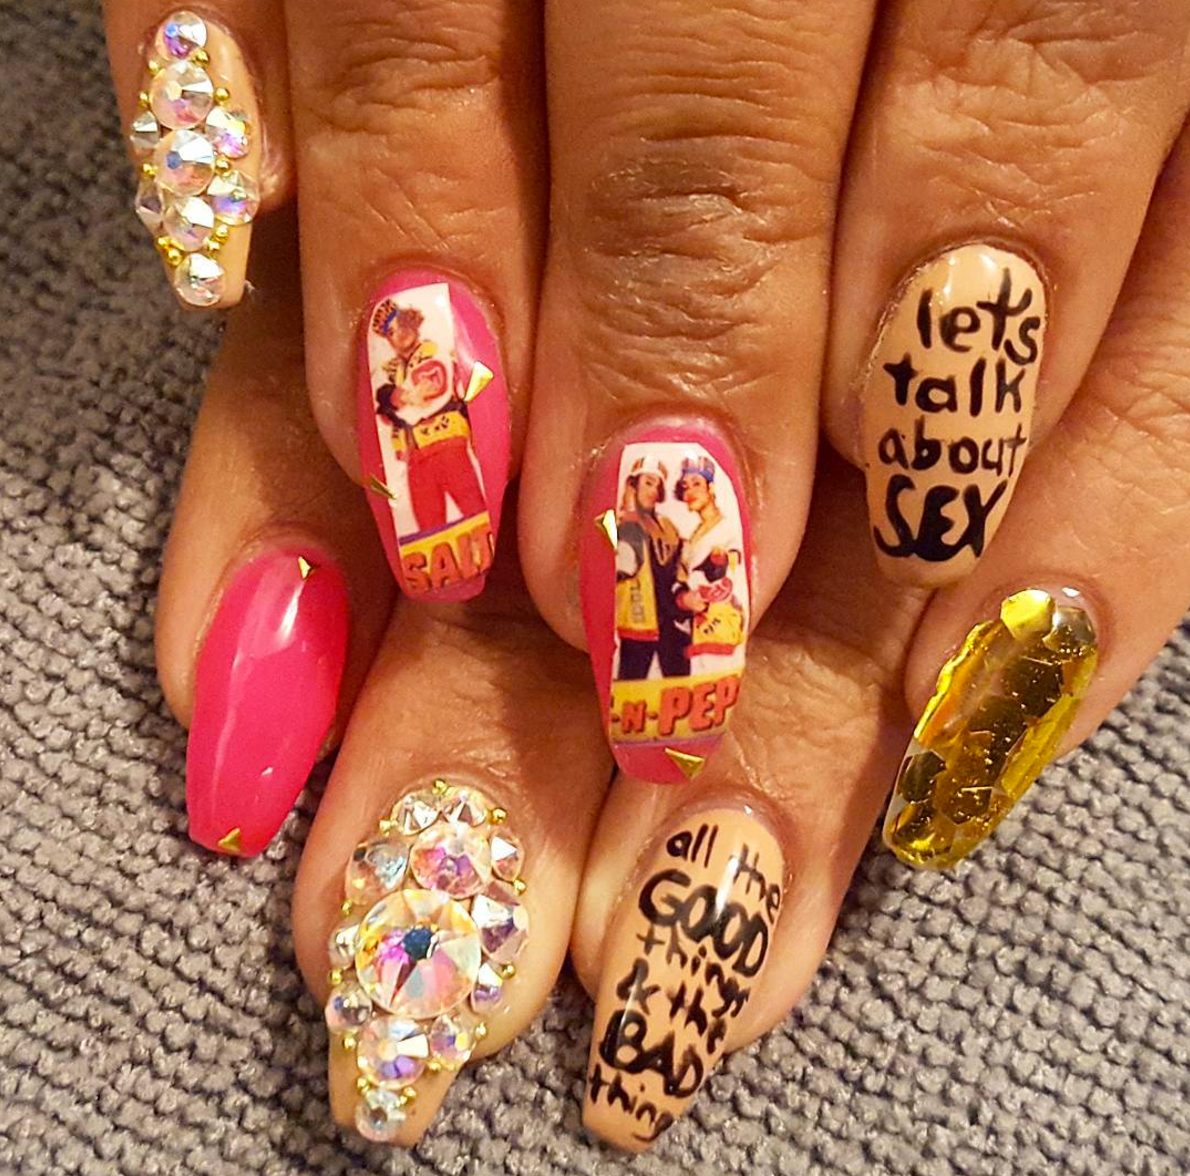 19 Nail Art Looks That Are Seriously Woke and Beautiful
